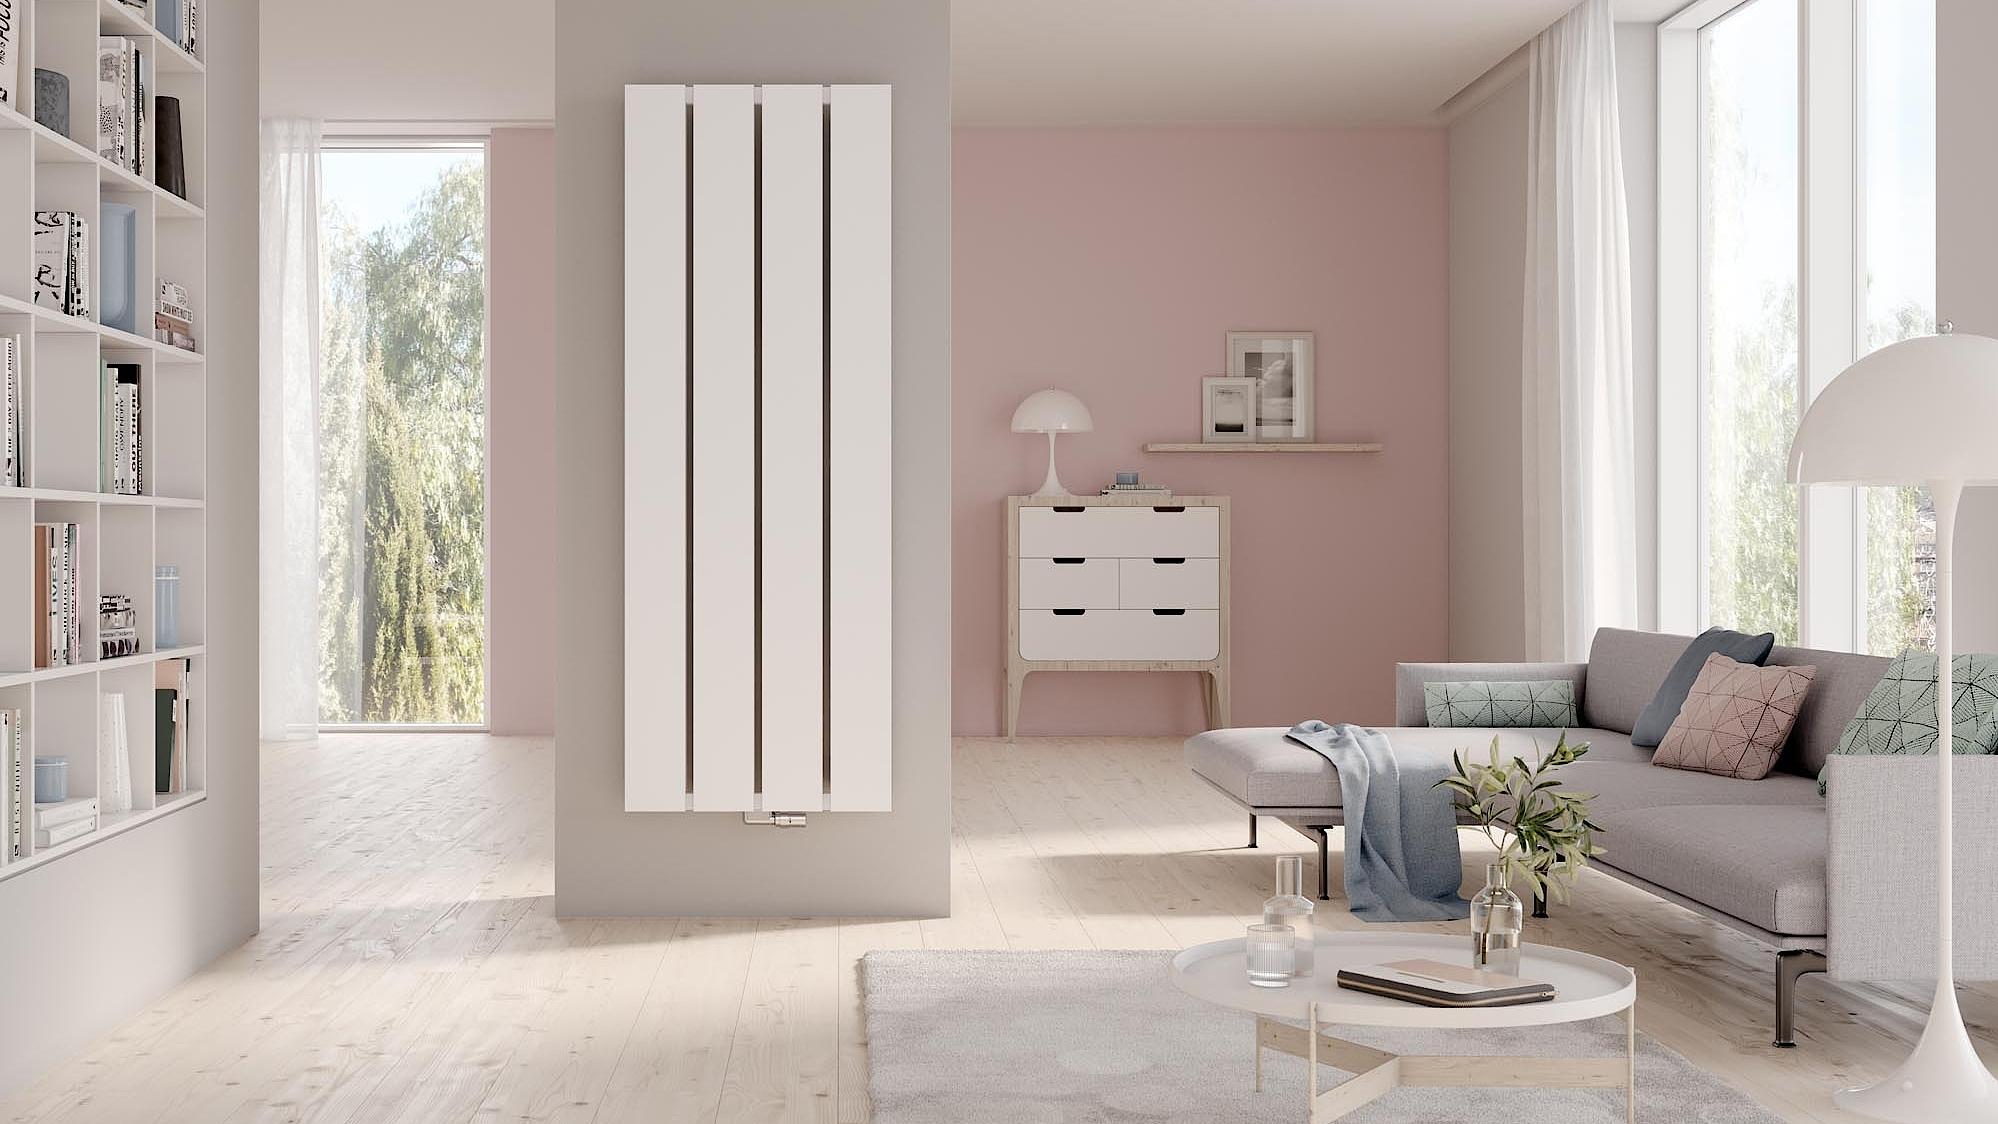 The Kermi Decor-Arte Plan design and bathroom radiator will thrill you with its modern and minimalist design.